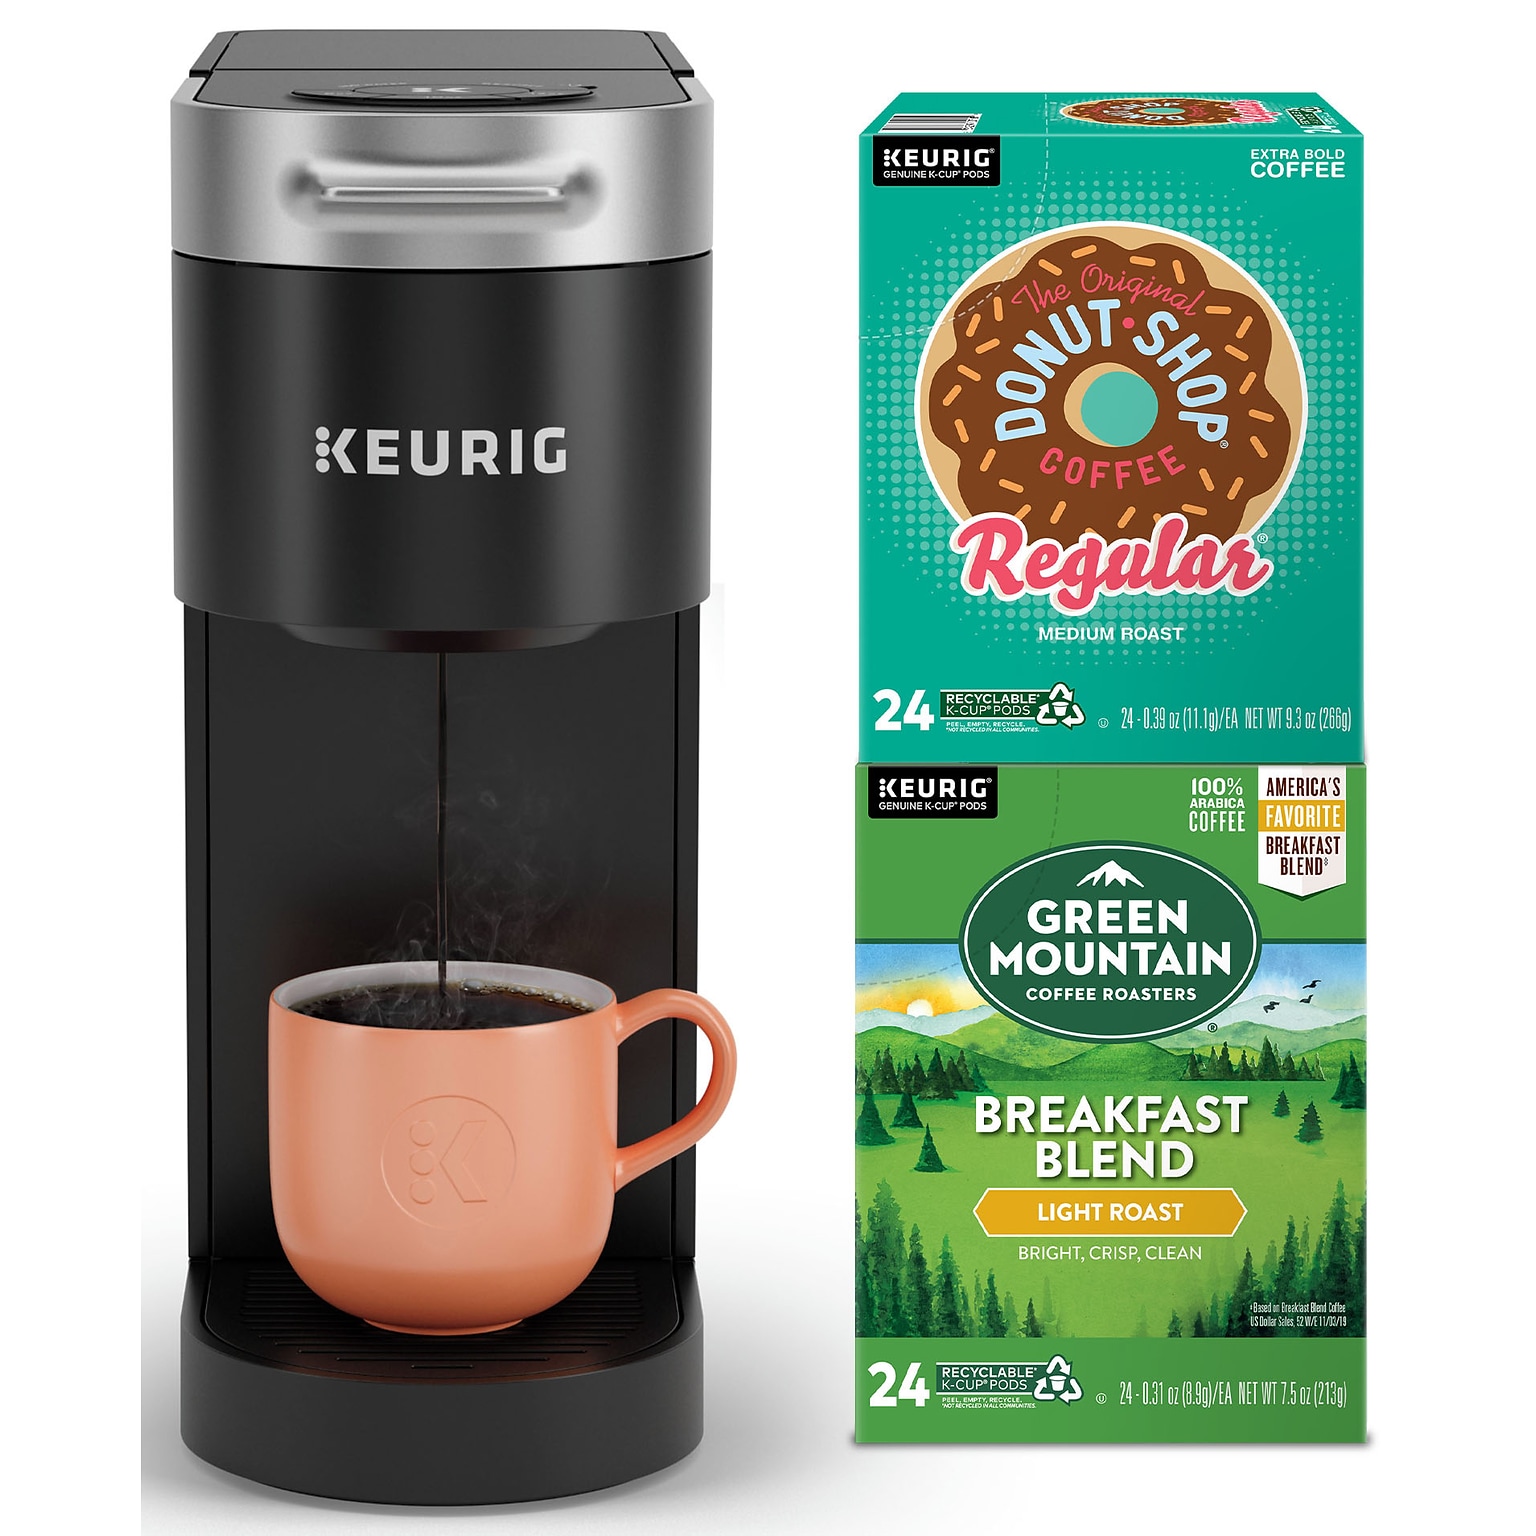 Your Choice of 2 Boxes of K-Cups® When You Buy 1 Keurig® K-Slim Single Serve Coffee Maker